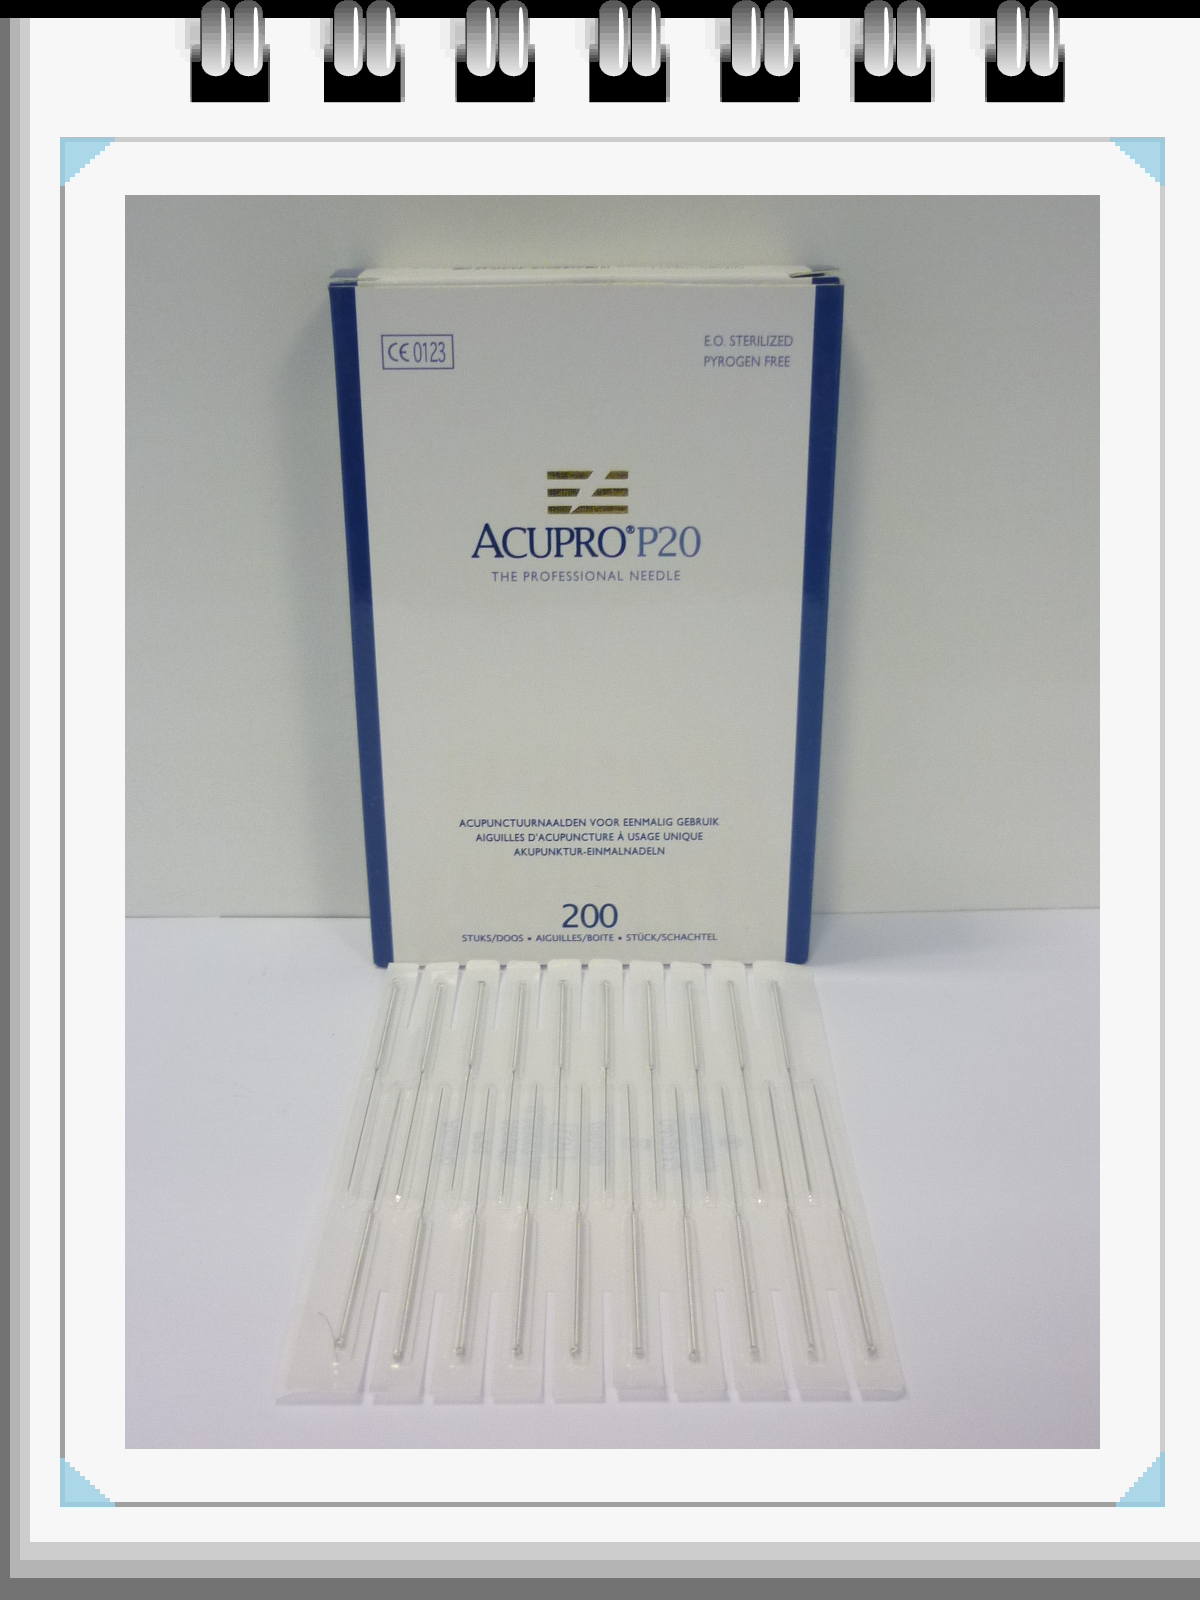 All Products - Acupuncture naalden 0,22 x 13mm - p--200